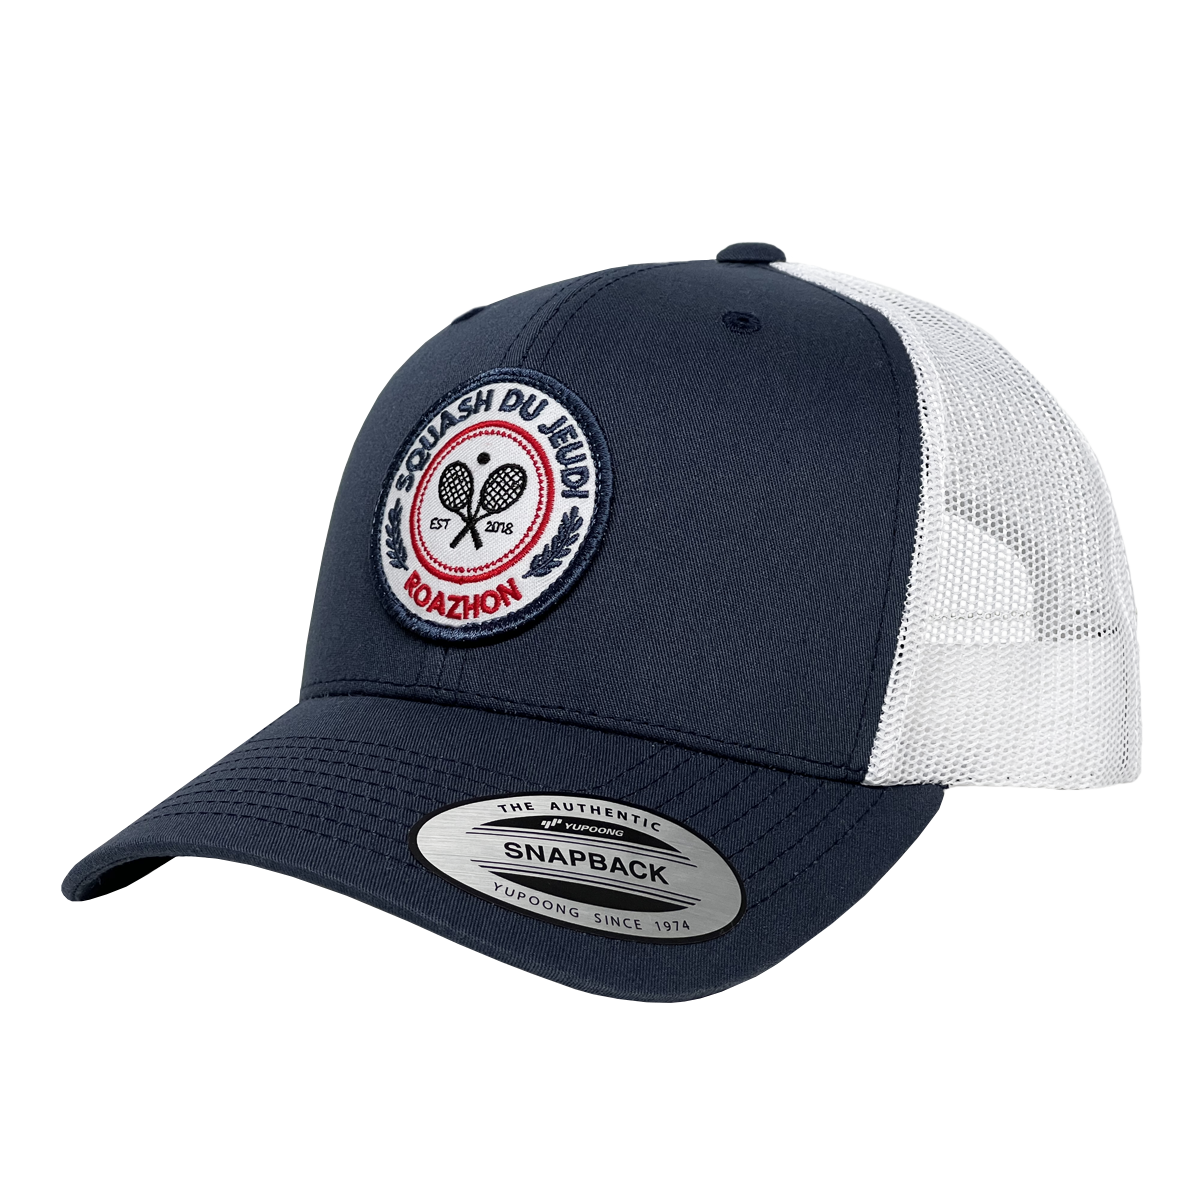 Casquette baseball personnalisable Reference : 1469